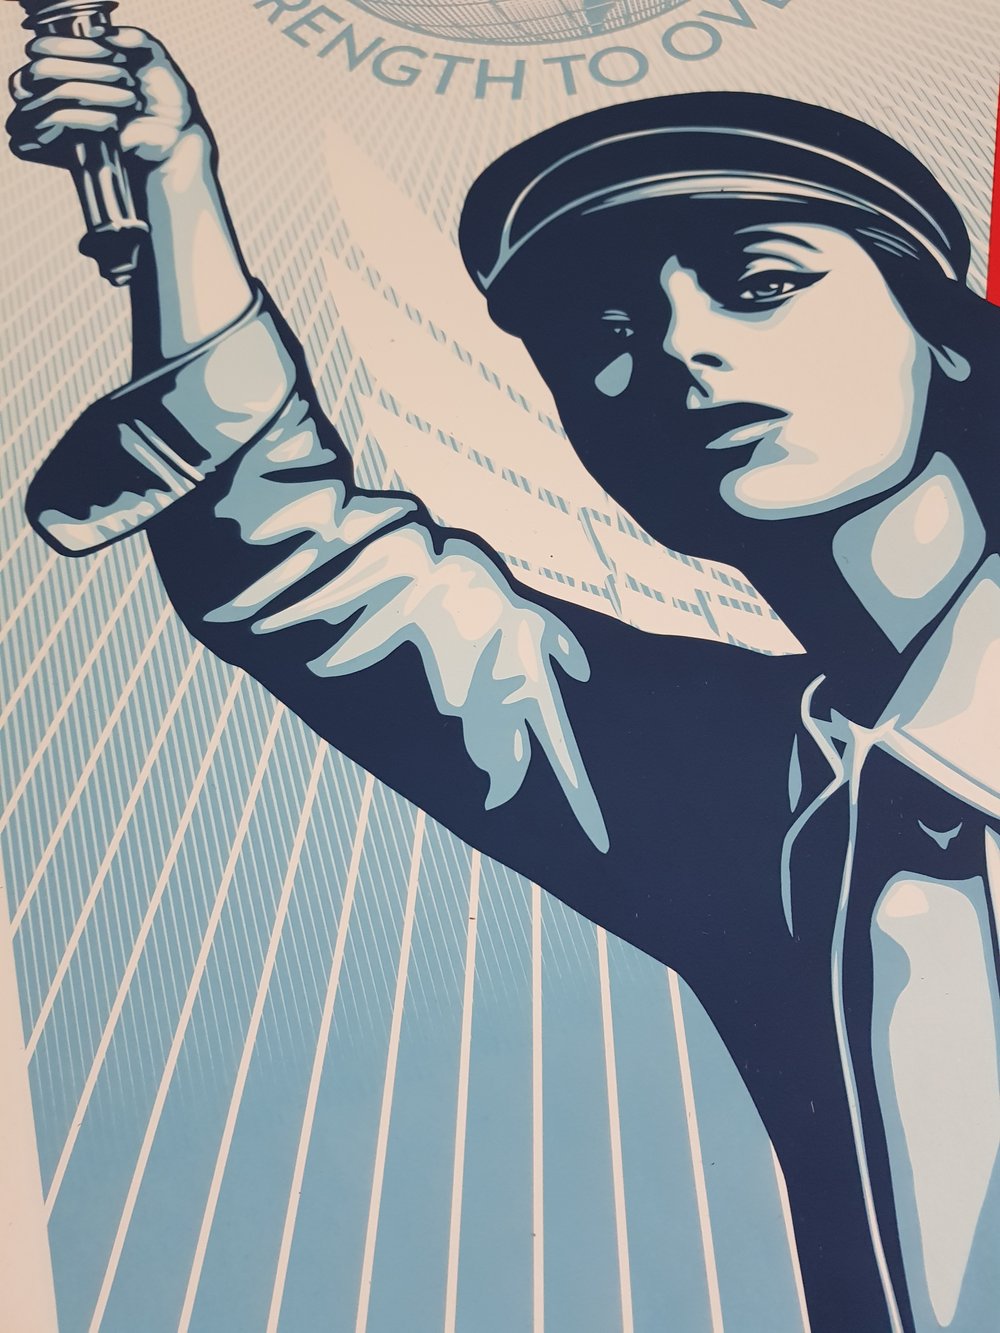 SHEPARD FAIREY (OBEY) - "ANGLE OF HOPE AND STRENGTH" - SIGNED LTD ED OF 550 - 60CM X 45CM